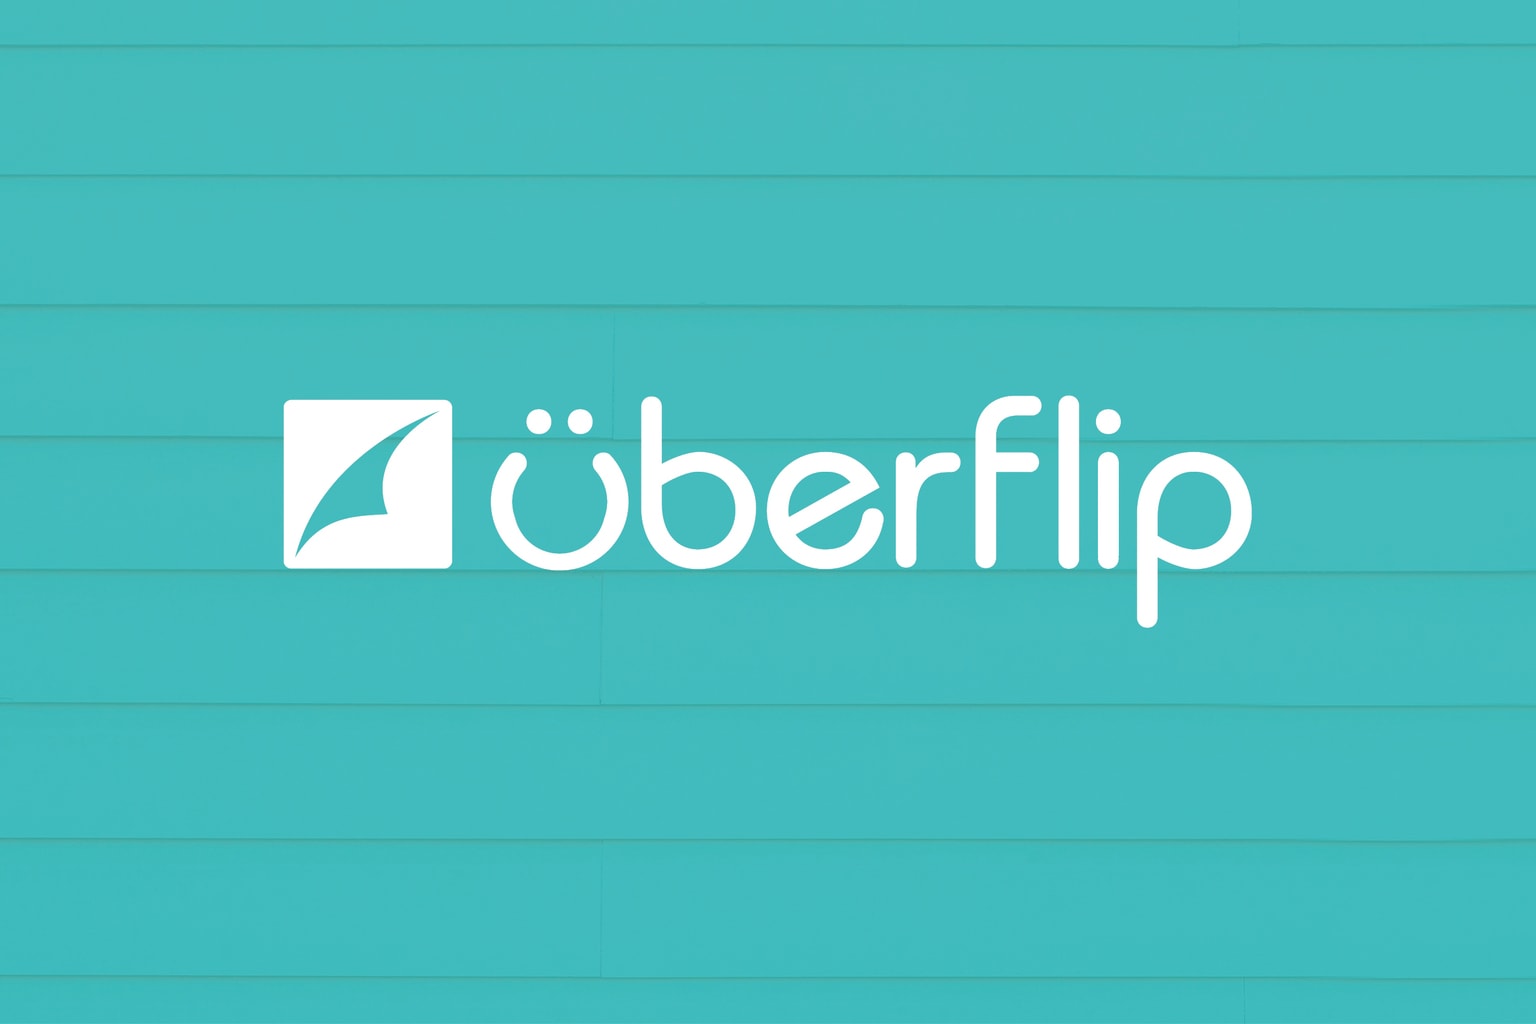 Should You Use Uberflip for Content Management?